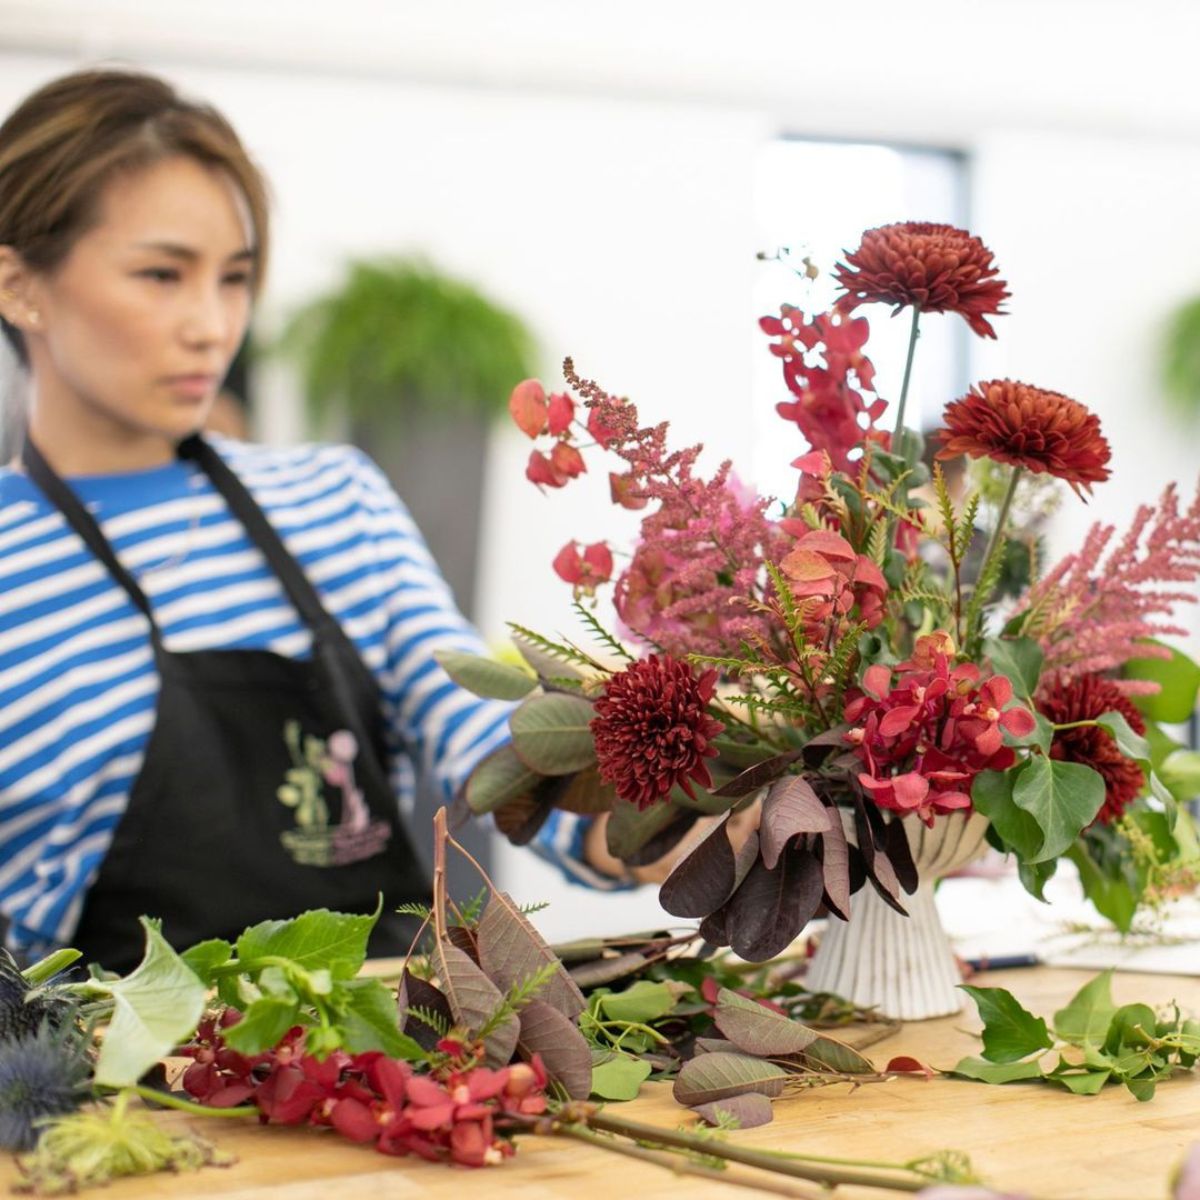 Students learning from greatest professionals at flowerschool